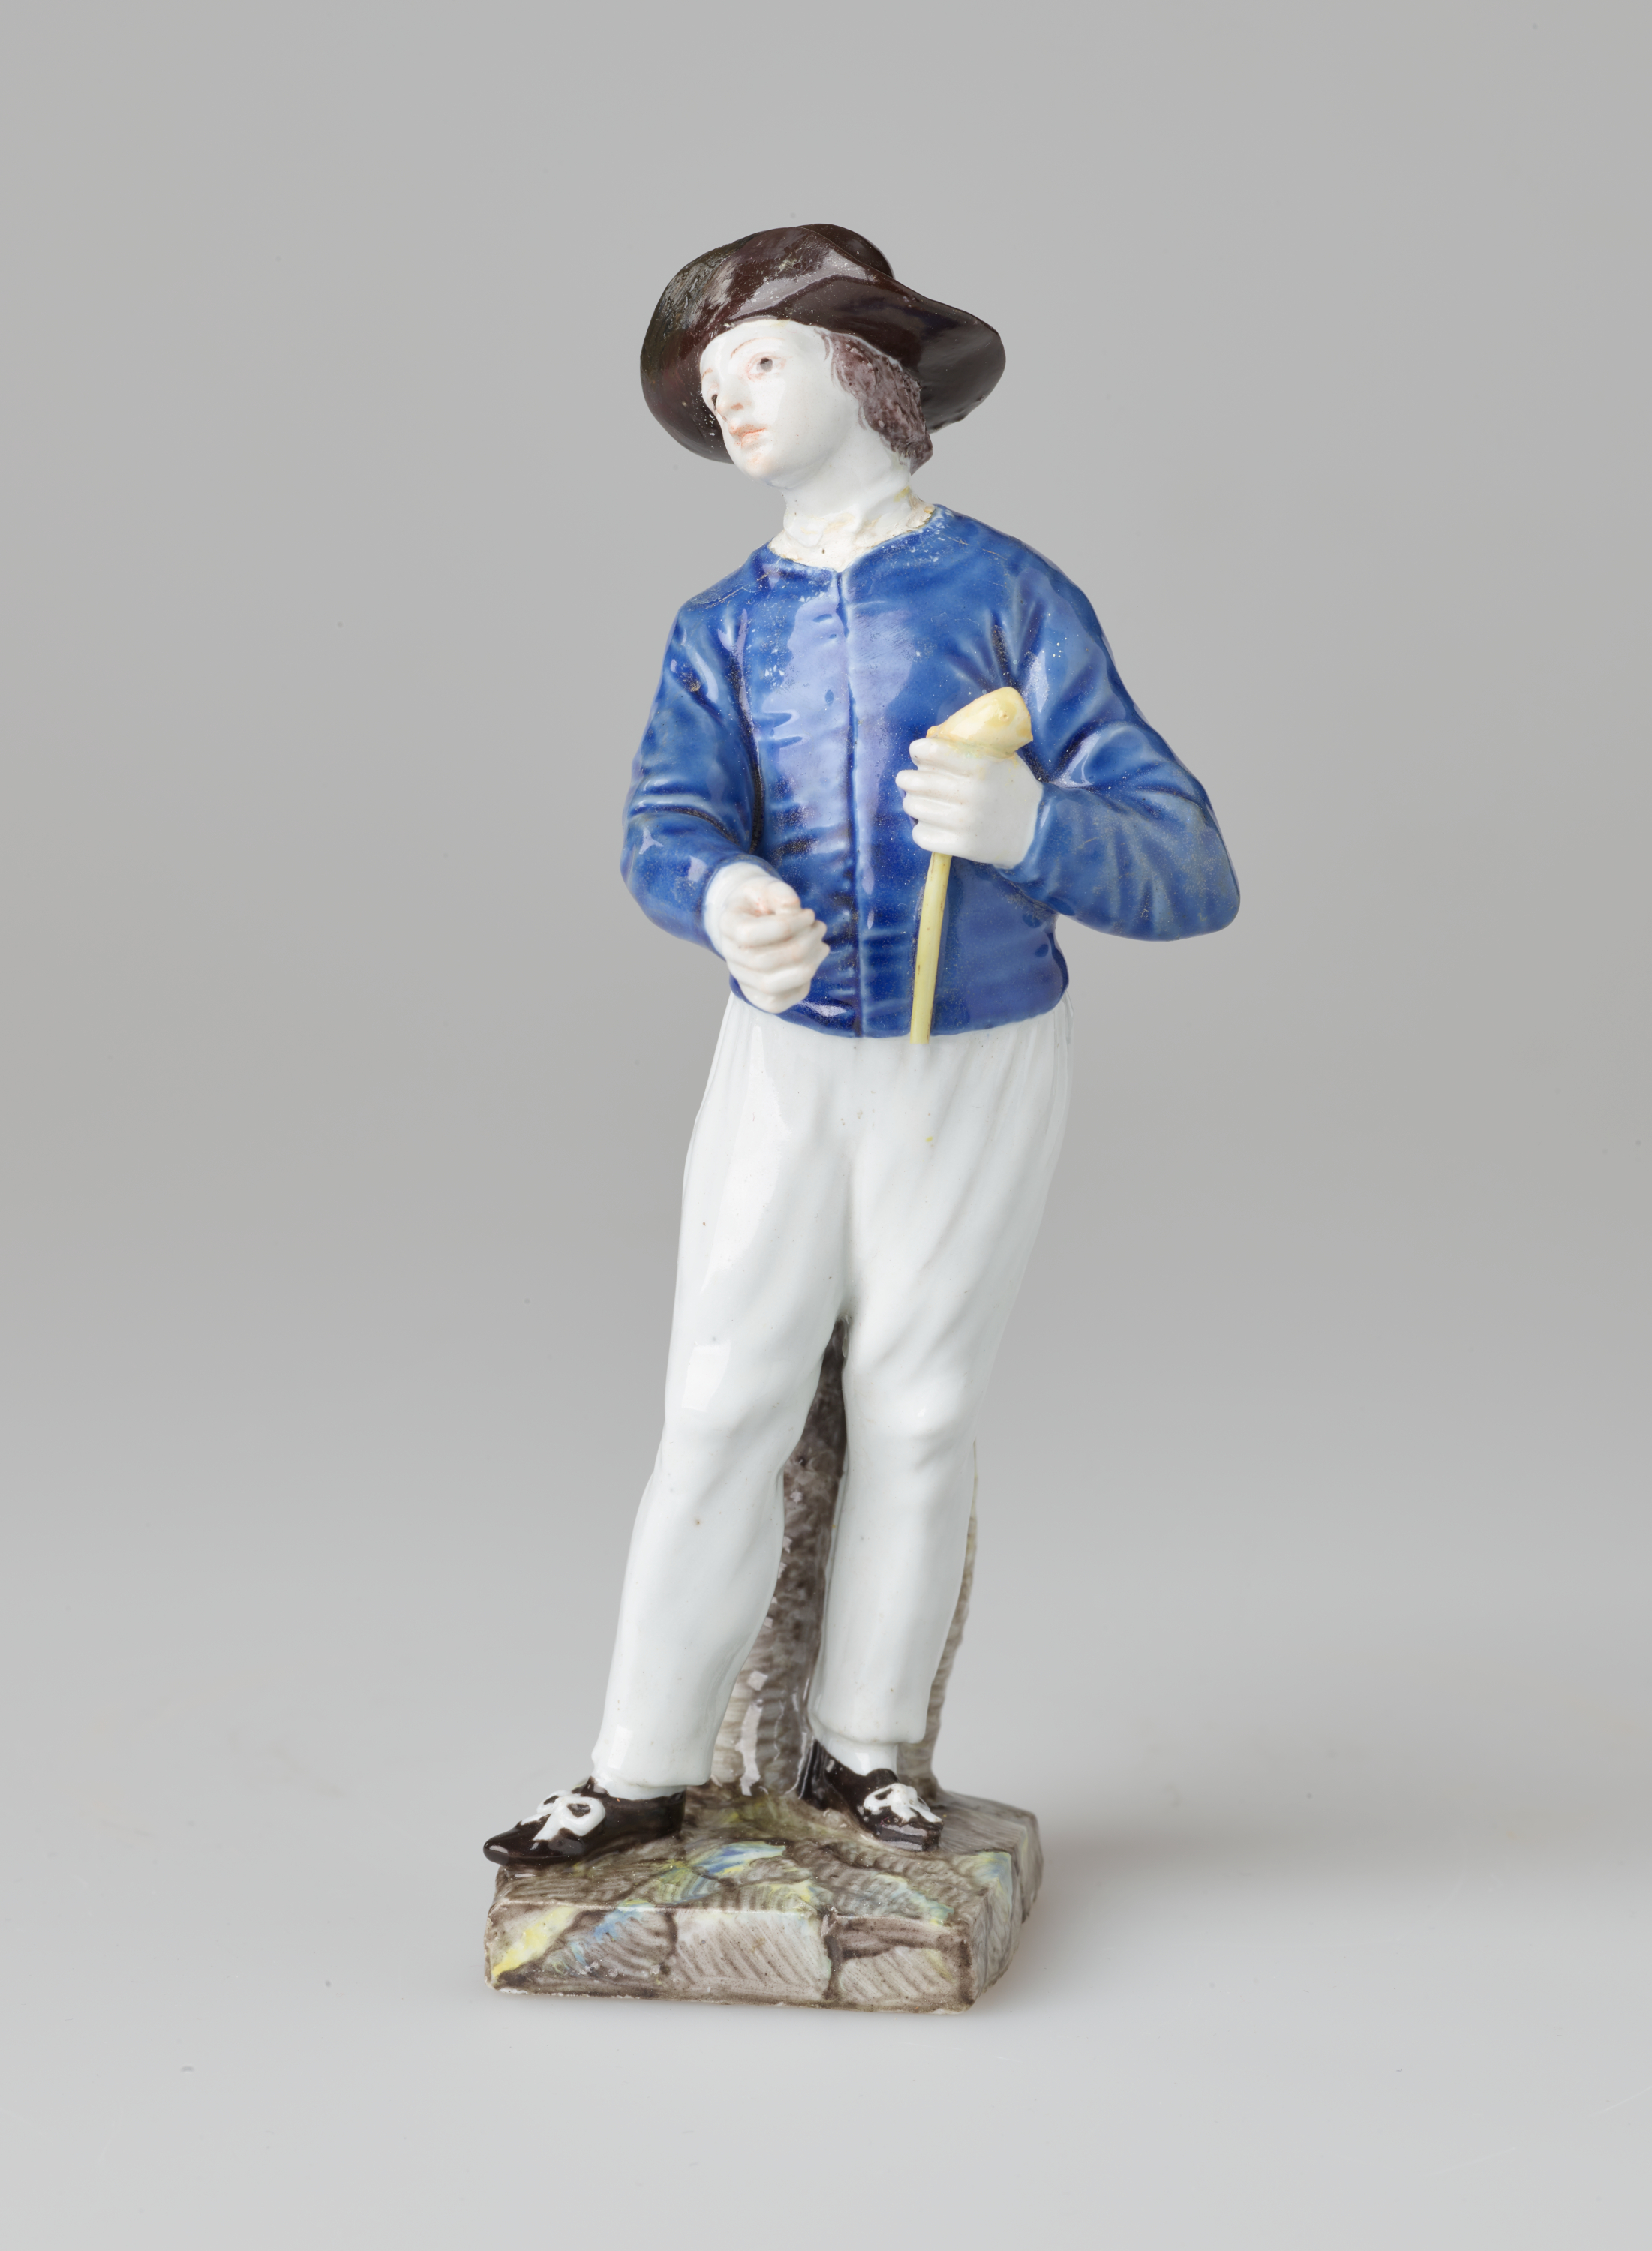 /A%20sculpture%20of%20a%20figure%20in%20historical%20clothes%2C%20a%20blue%20shirt%2C%20white%20pants%2C%20black%20shoes%20and%20hat.%20The%20figure%20is%20also%20holding%20a%20pipe.